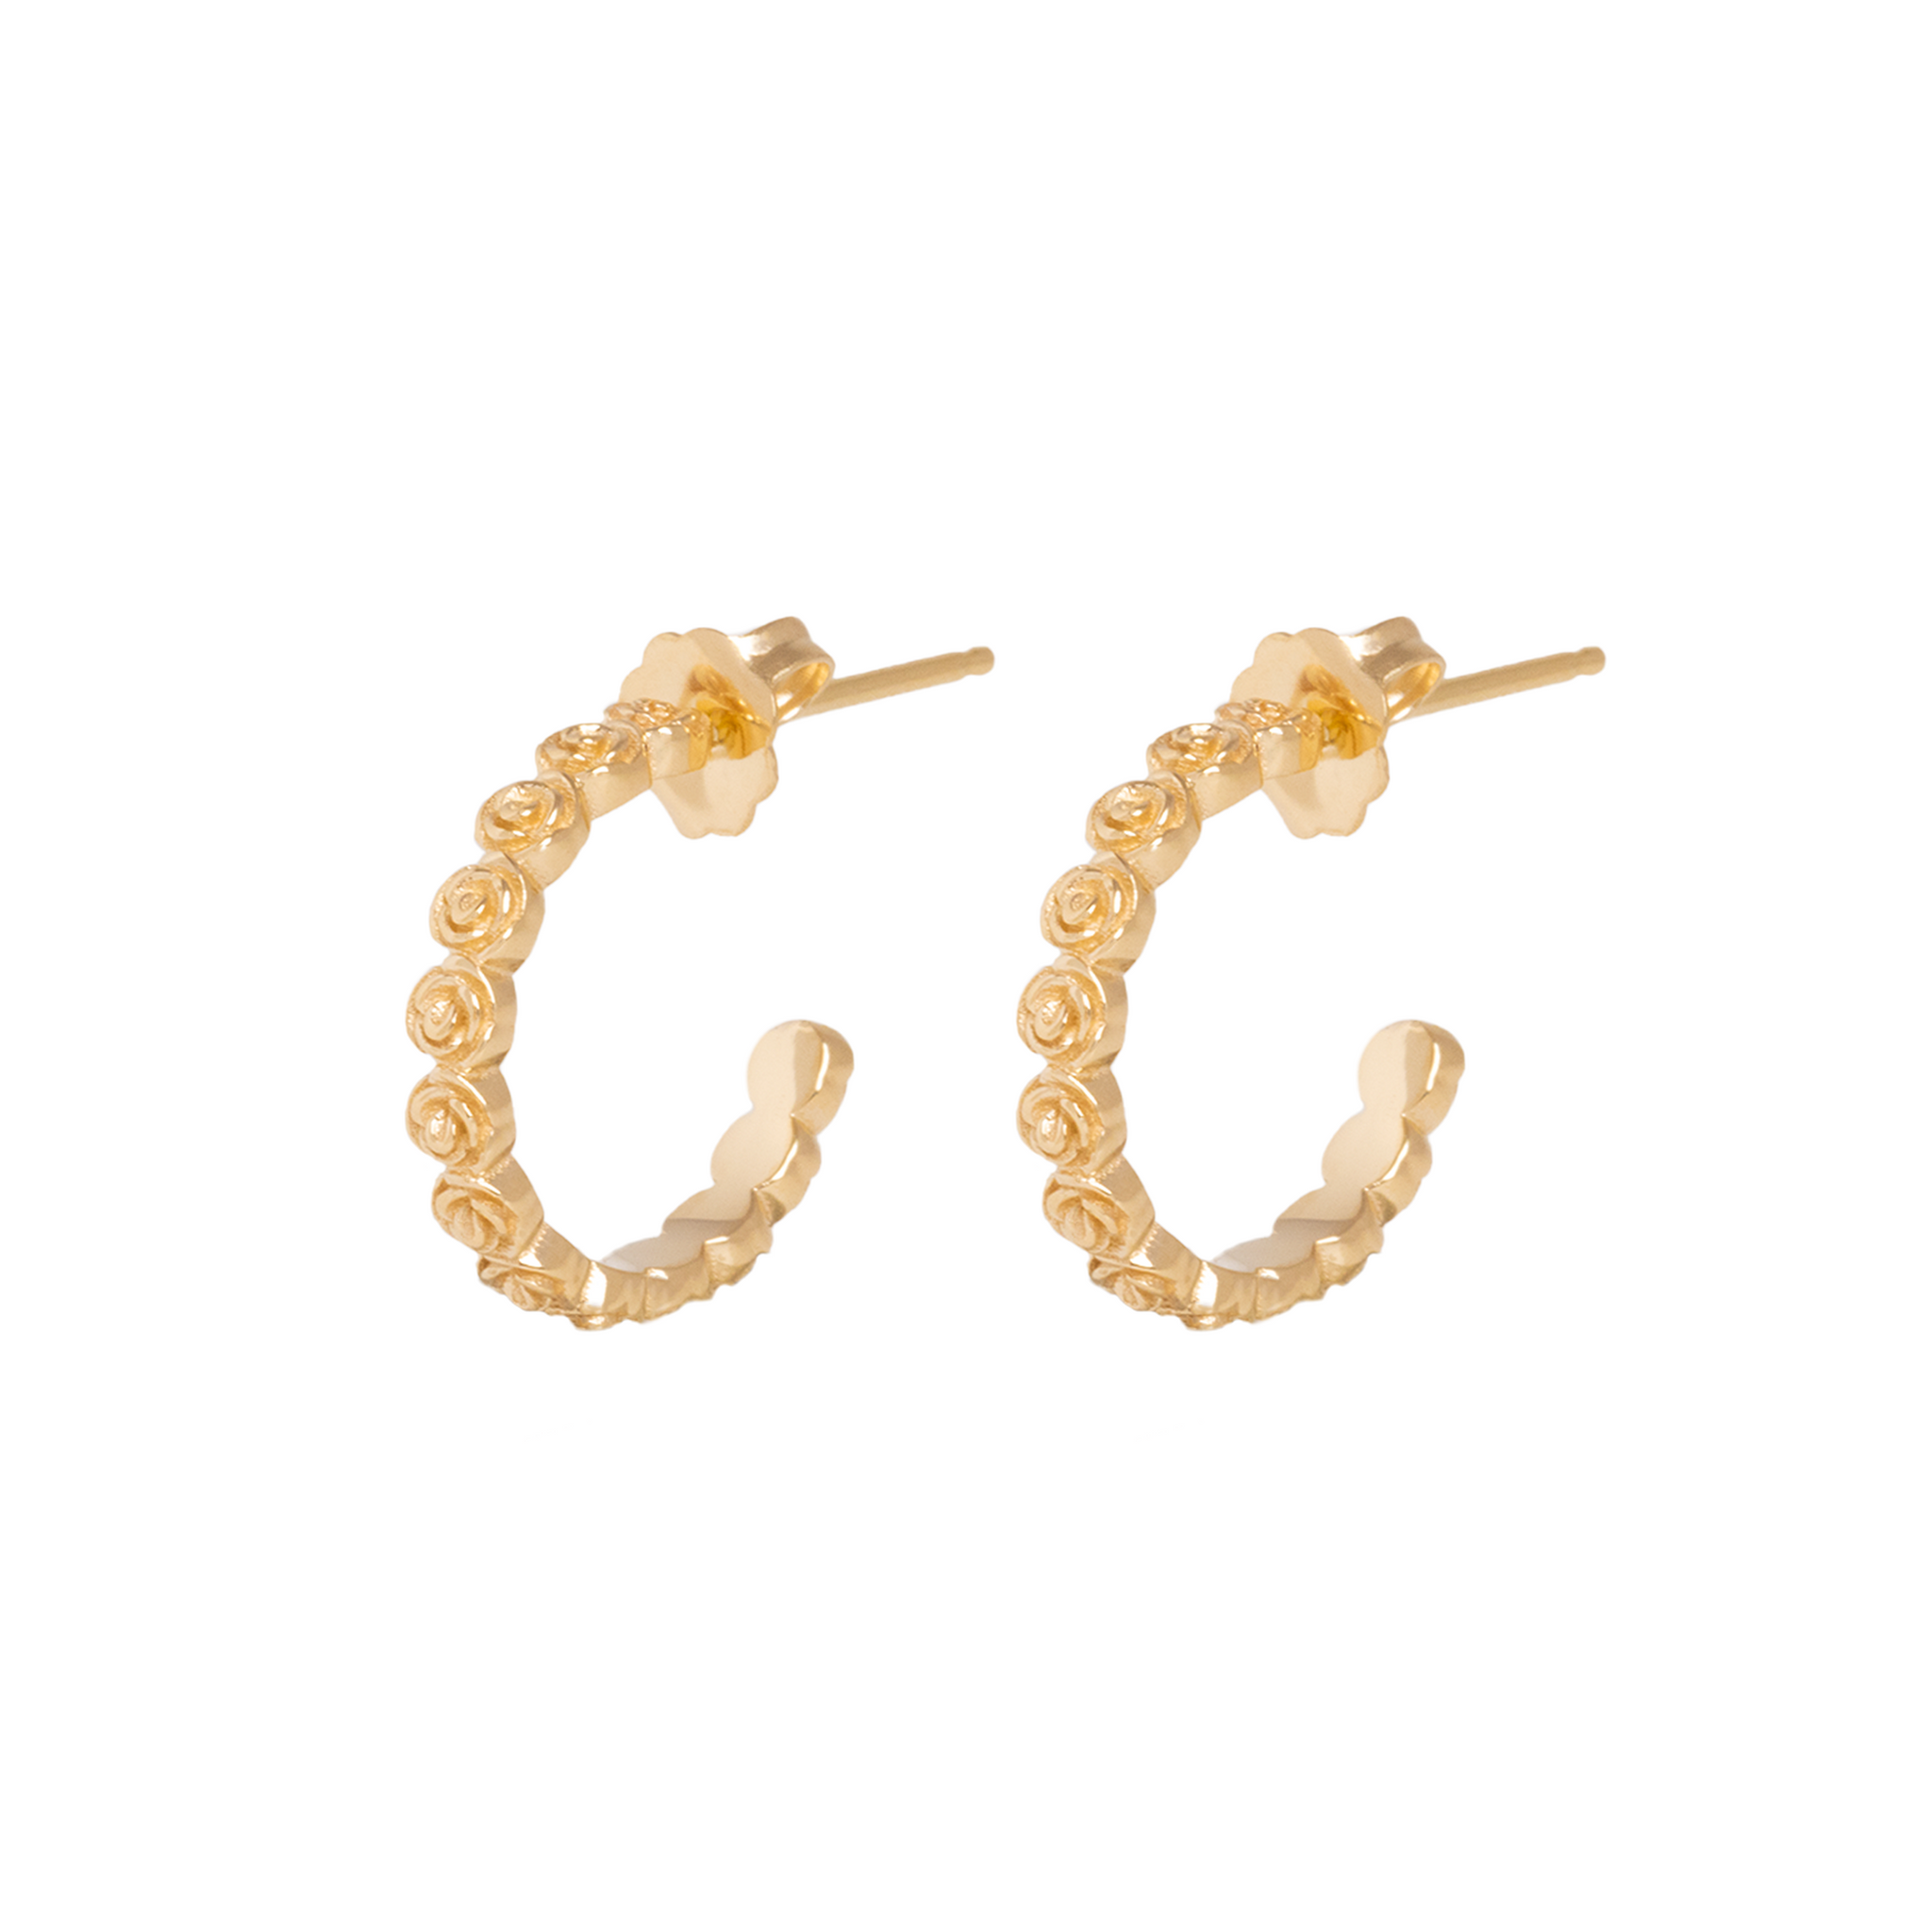 10K Gold Super Micro Rose Earrings on white background 3/4 view